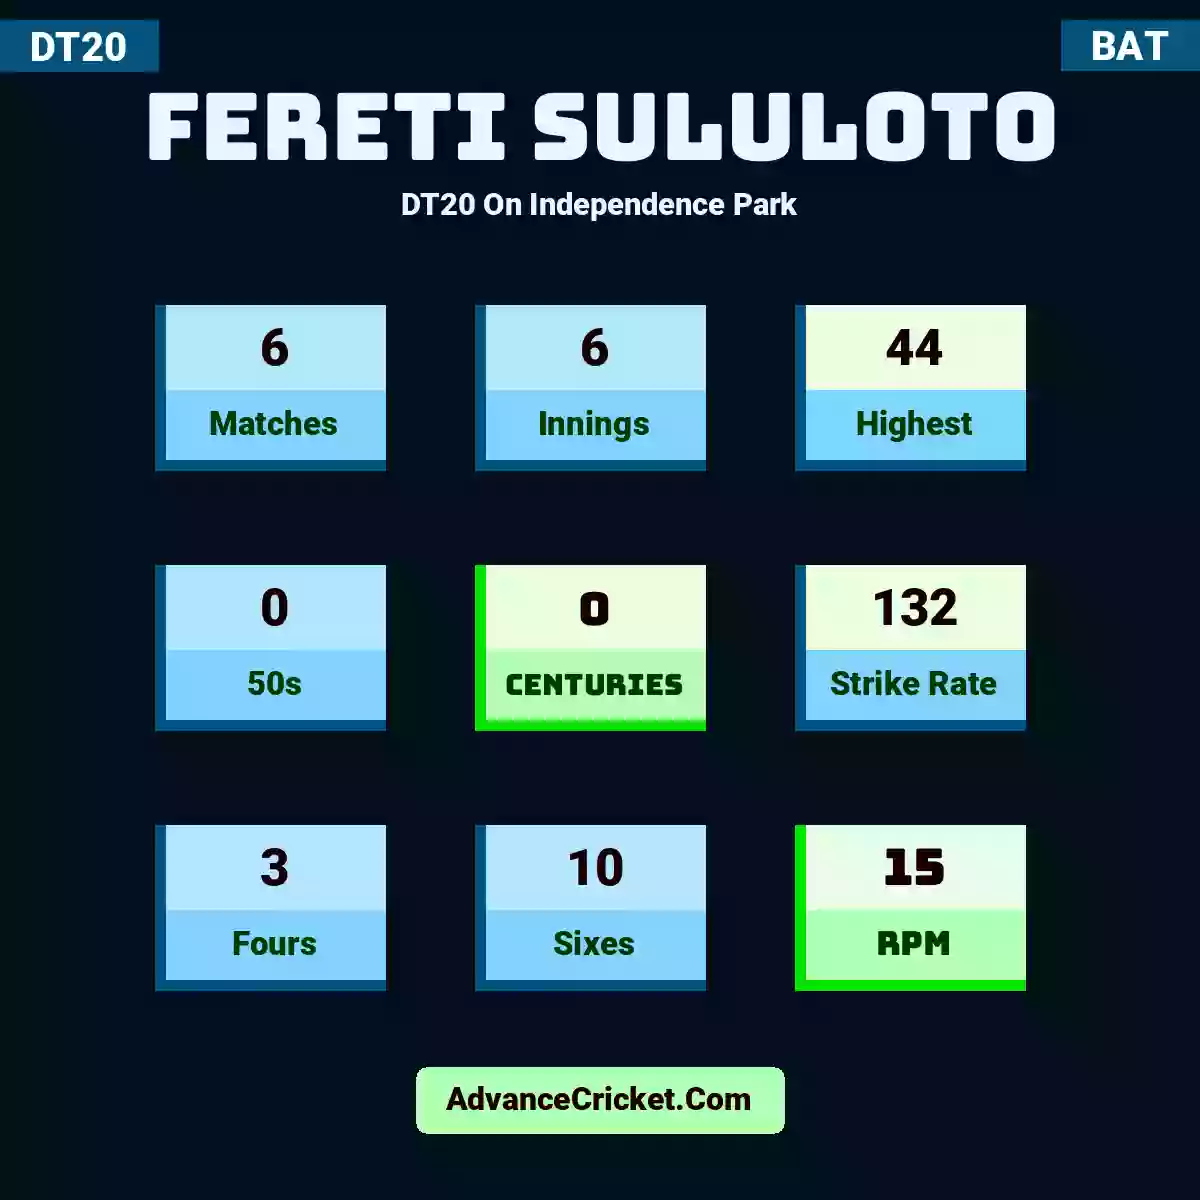 Fereti Sululoto DT20  On Independence Park, Fereti Sululoto played 6 matches, scored 44 runs as highest, 0 half-centuries, and 0 centuries, with a strike rate of 132. F.Sululoto hit 3 fours and 10 sixes, with an RPM of 15.